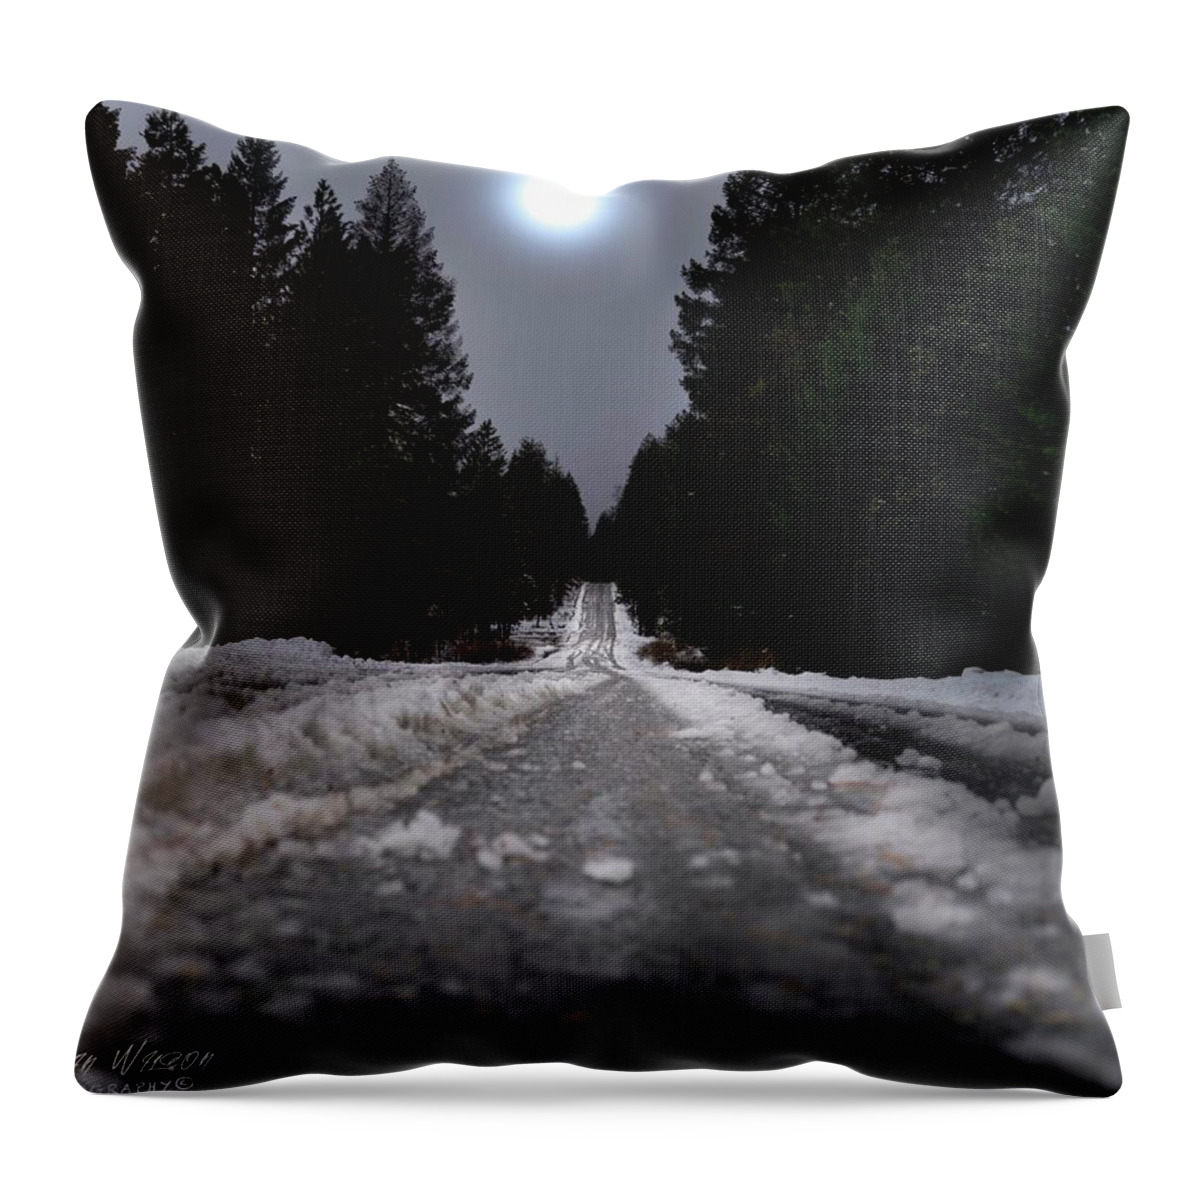  Throw Pillow featuring the photograph Moonlit Mountain by Devin Wilson